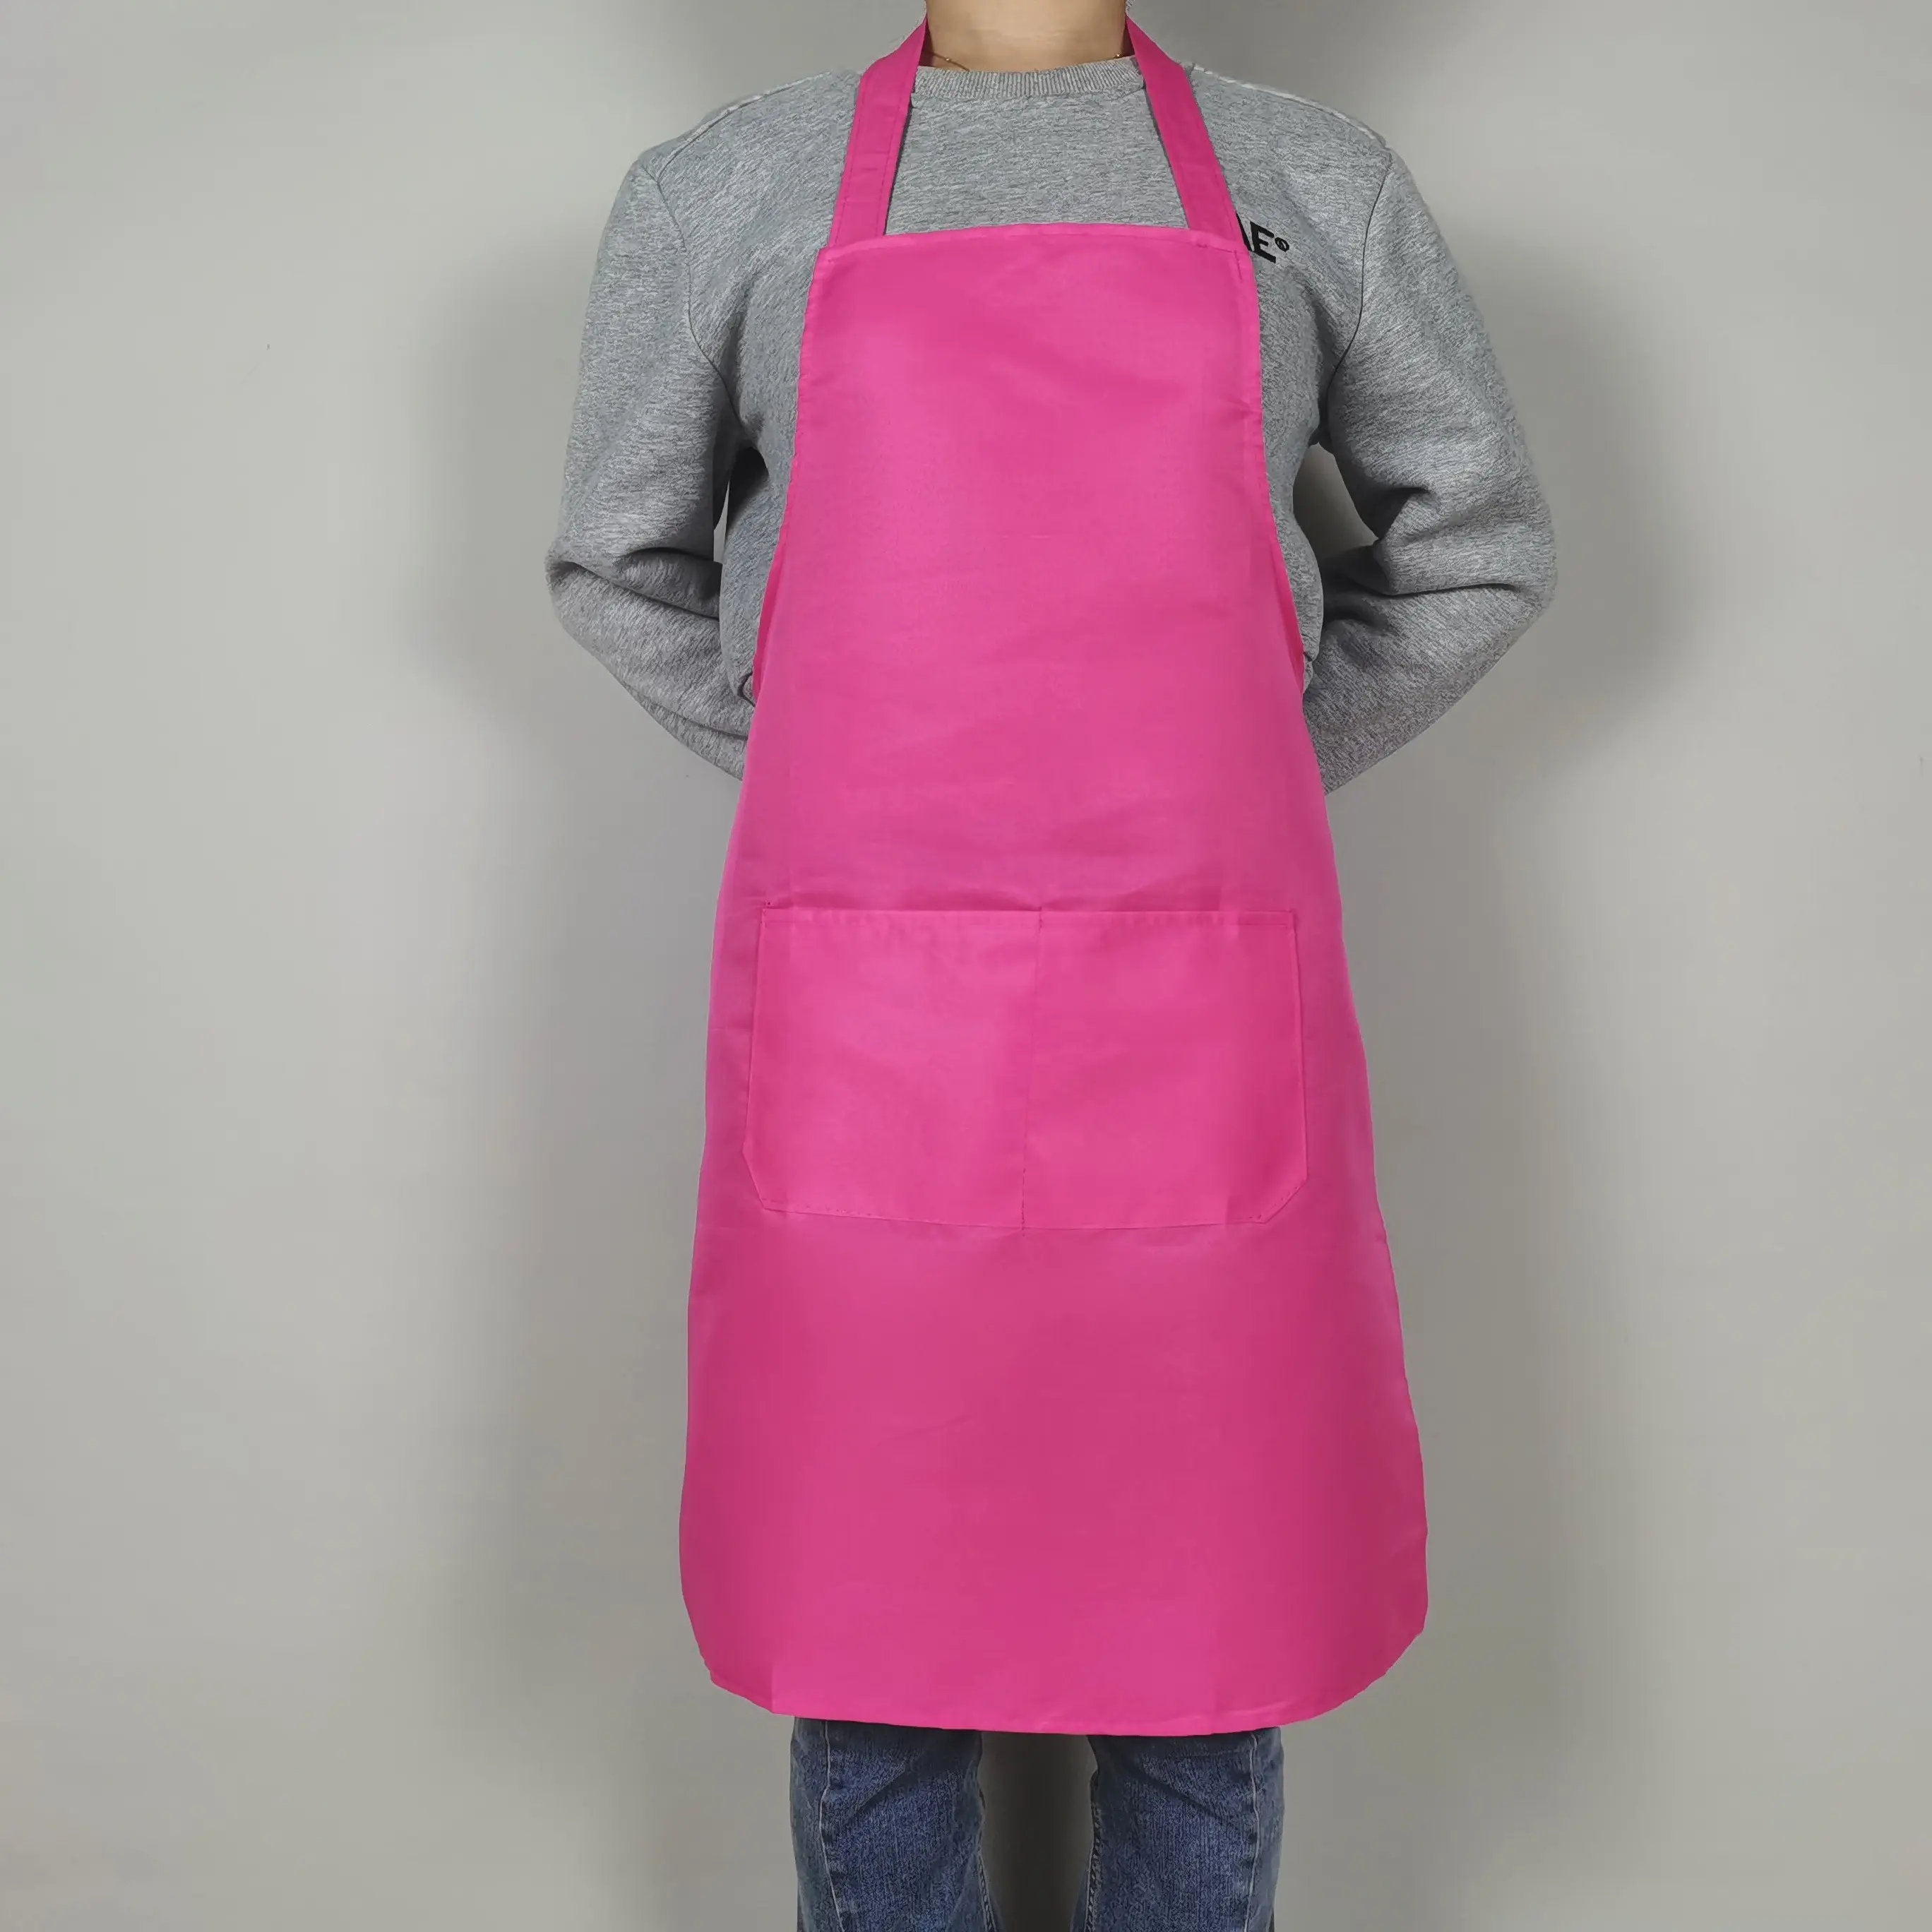 Disposable White Roll of 200 Aprons Amazing Quality Great Price Fantastic Bargain